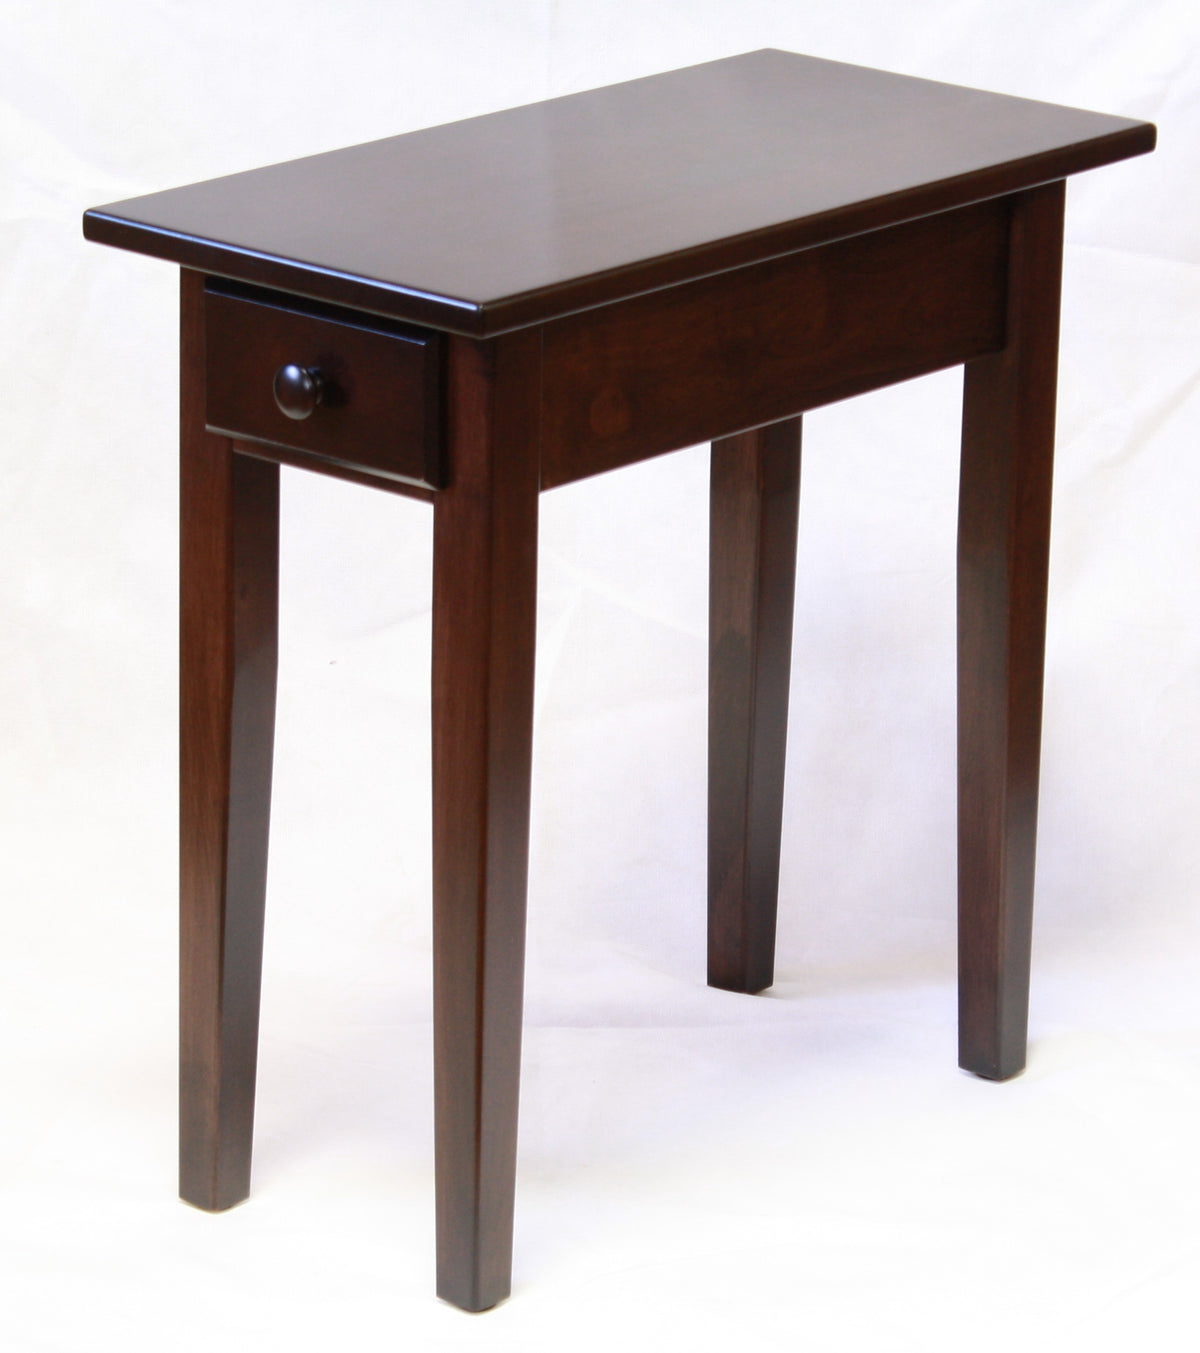 Woodland Shaker Chairside Small End Table with Shelf from